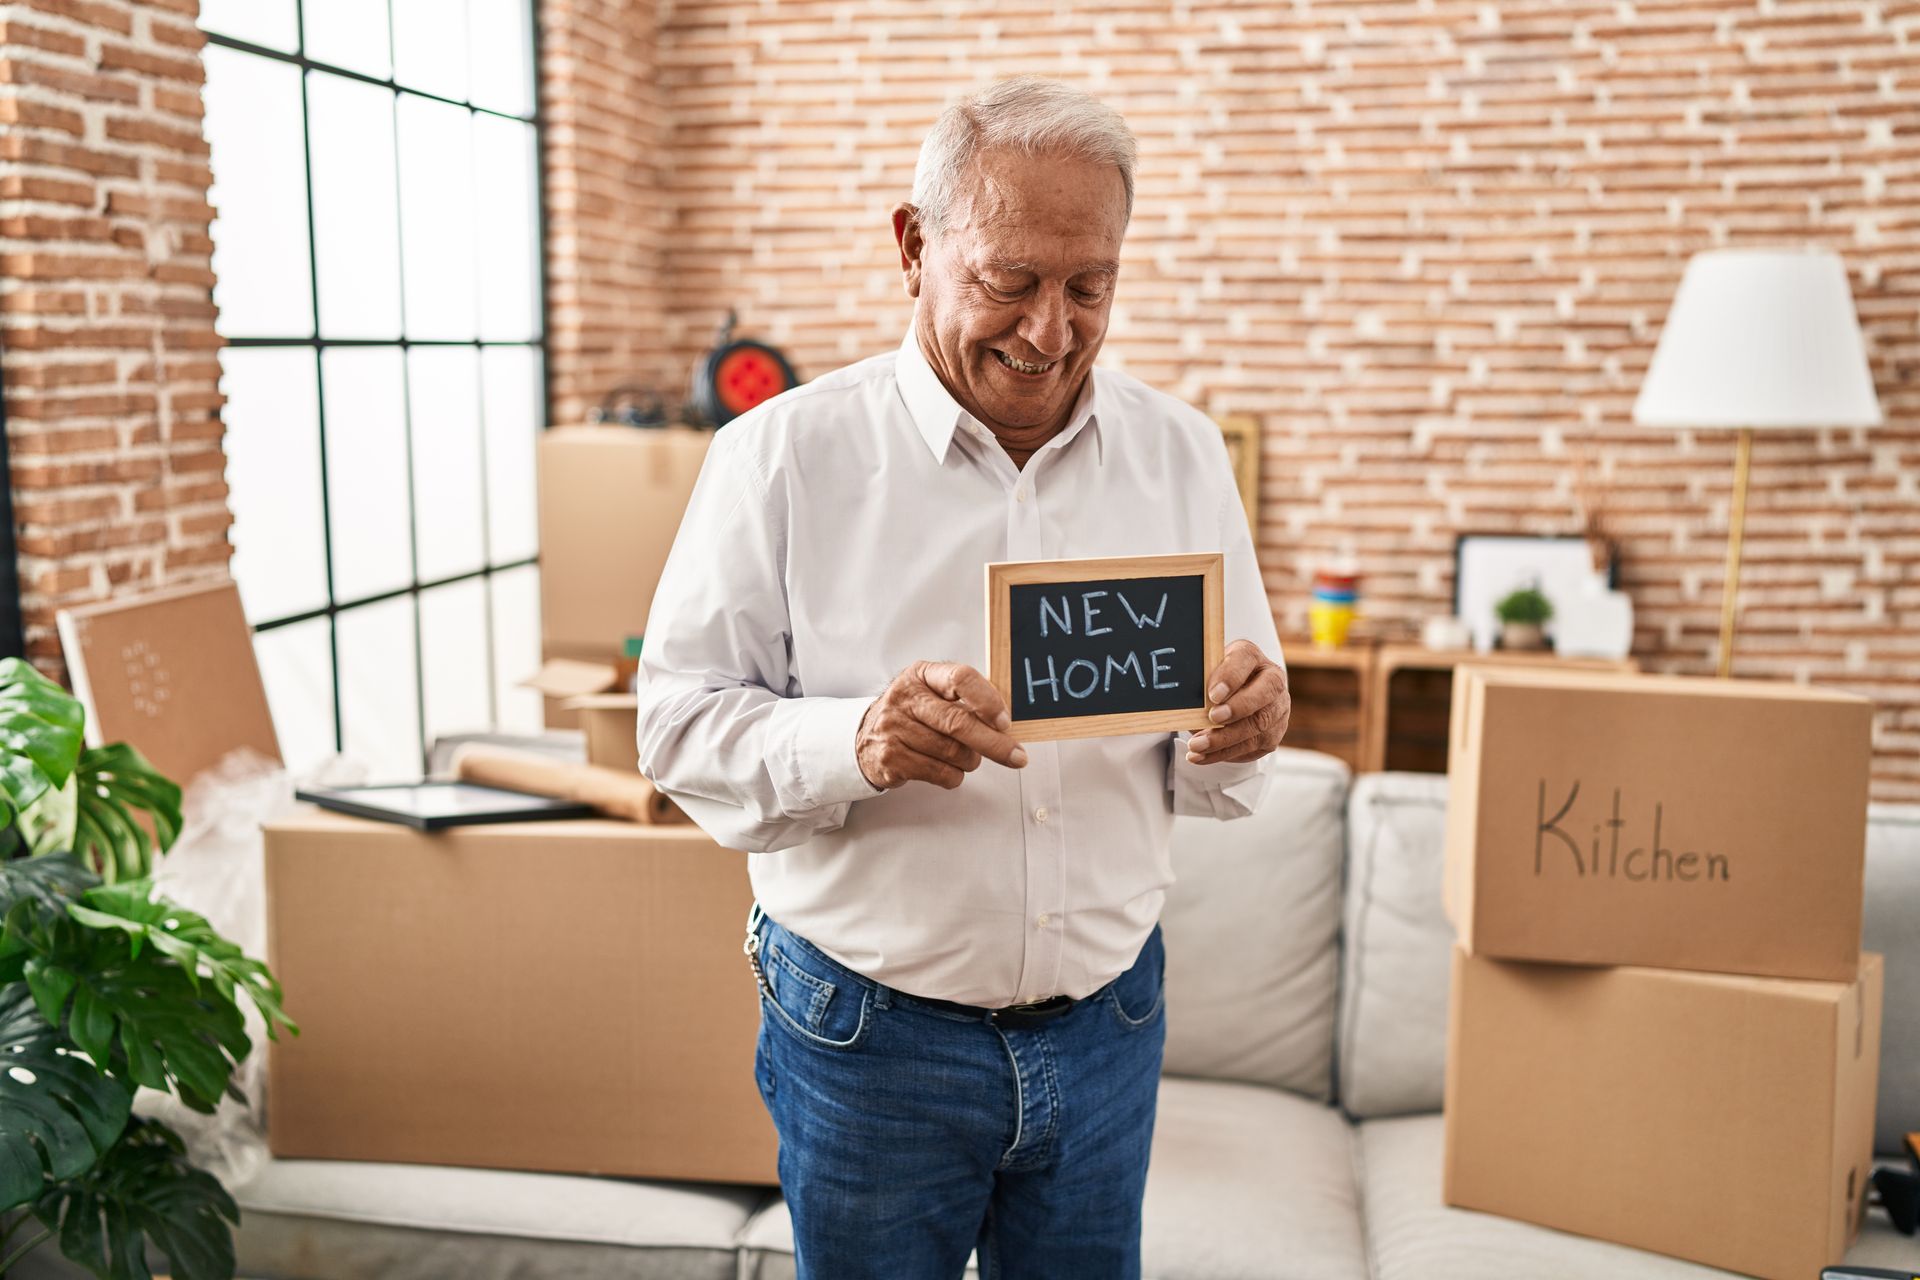 An elderly man is holding a sign that says `` new home '' in a living room.